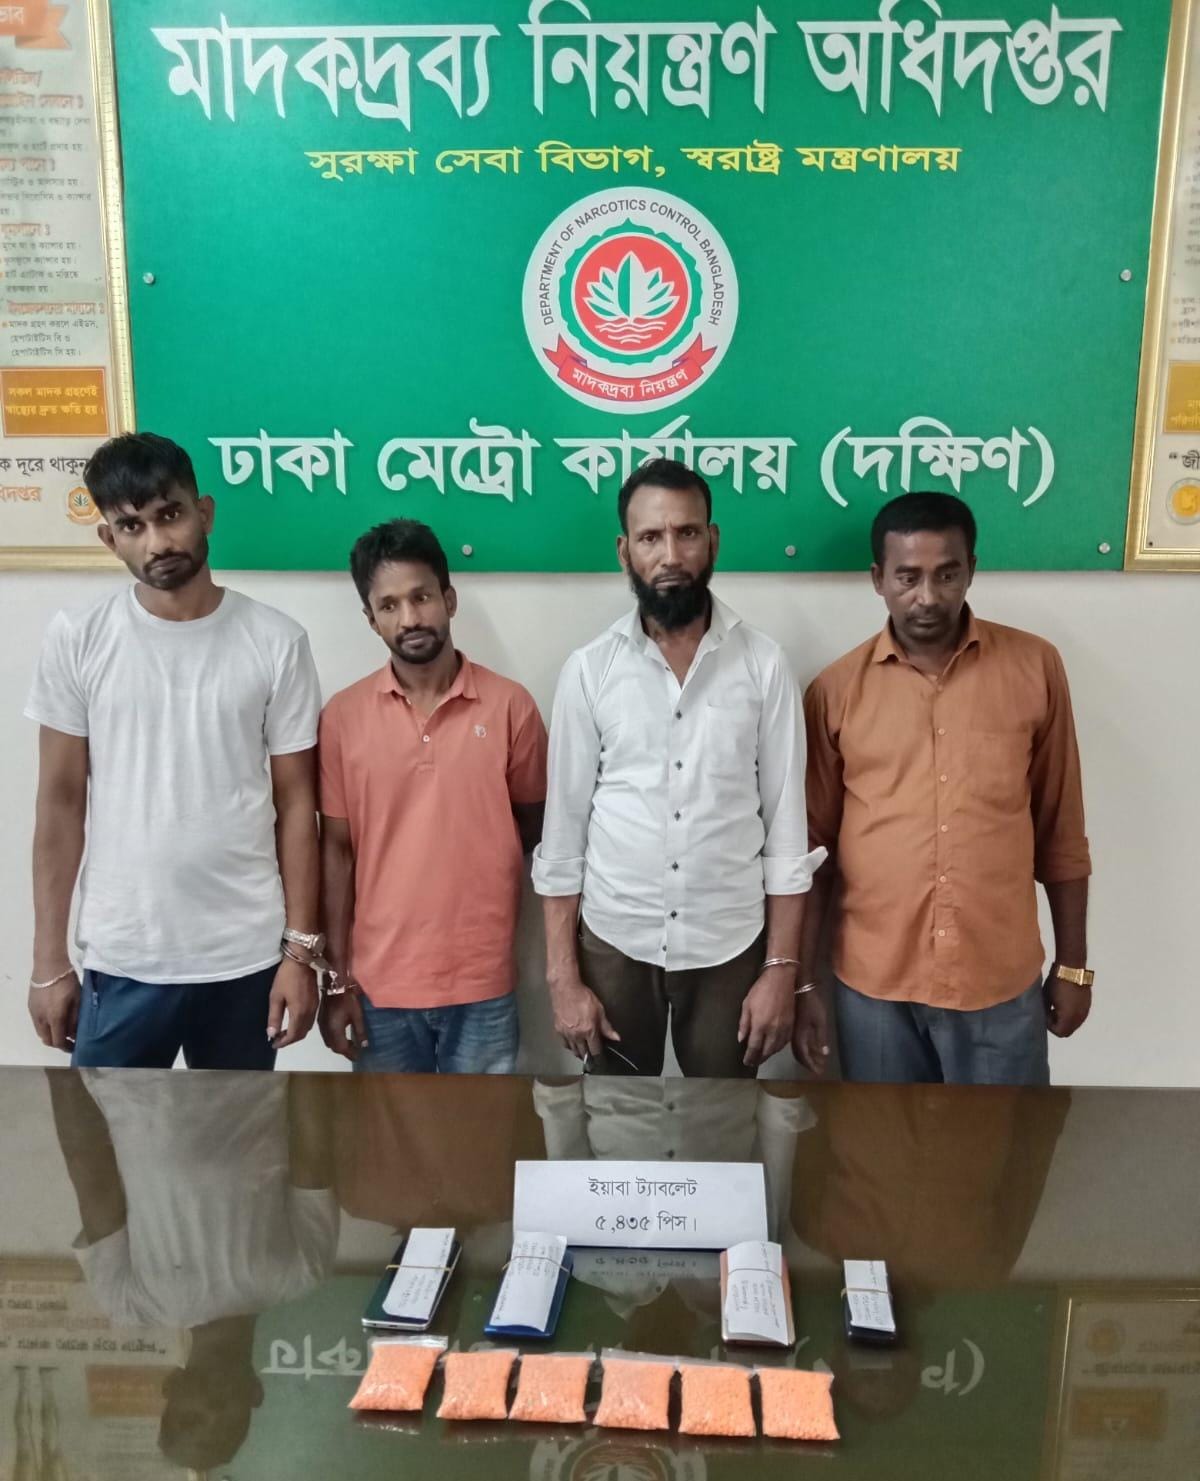 4 transport workers arrested with Yaba pills worth Tk 20 lakh in Dhaka